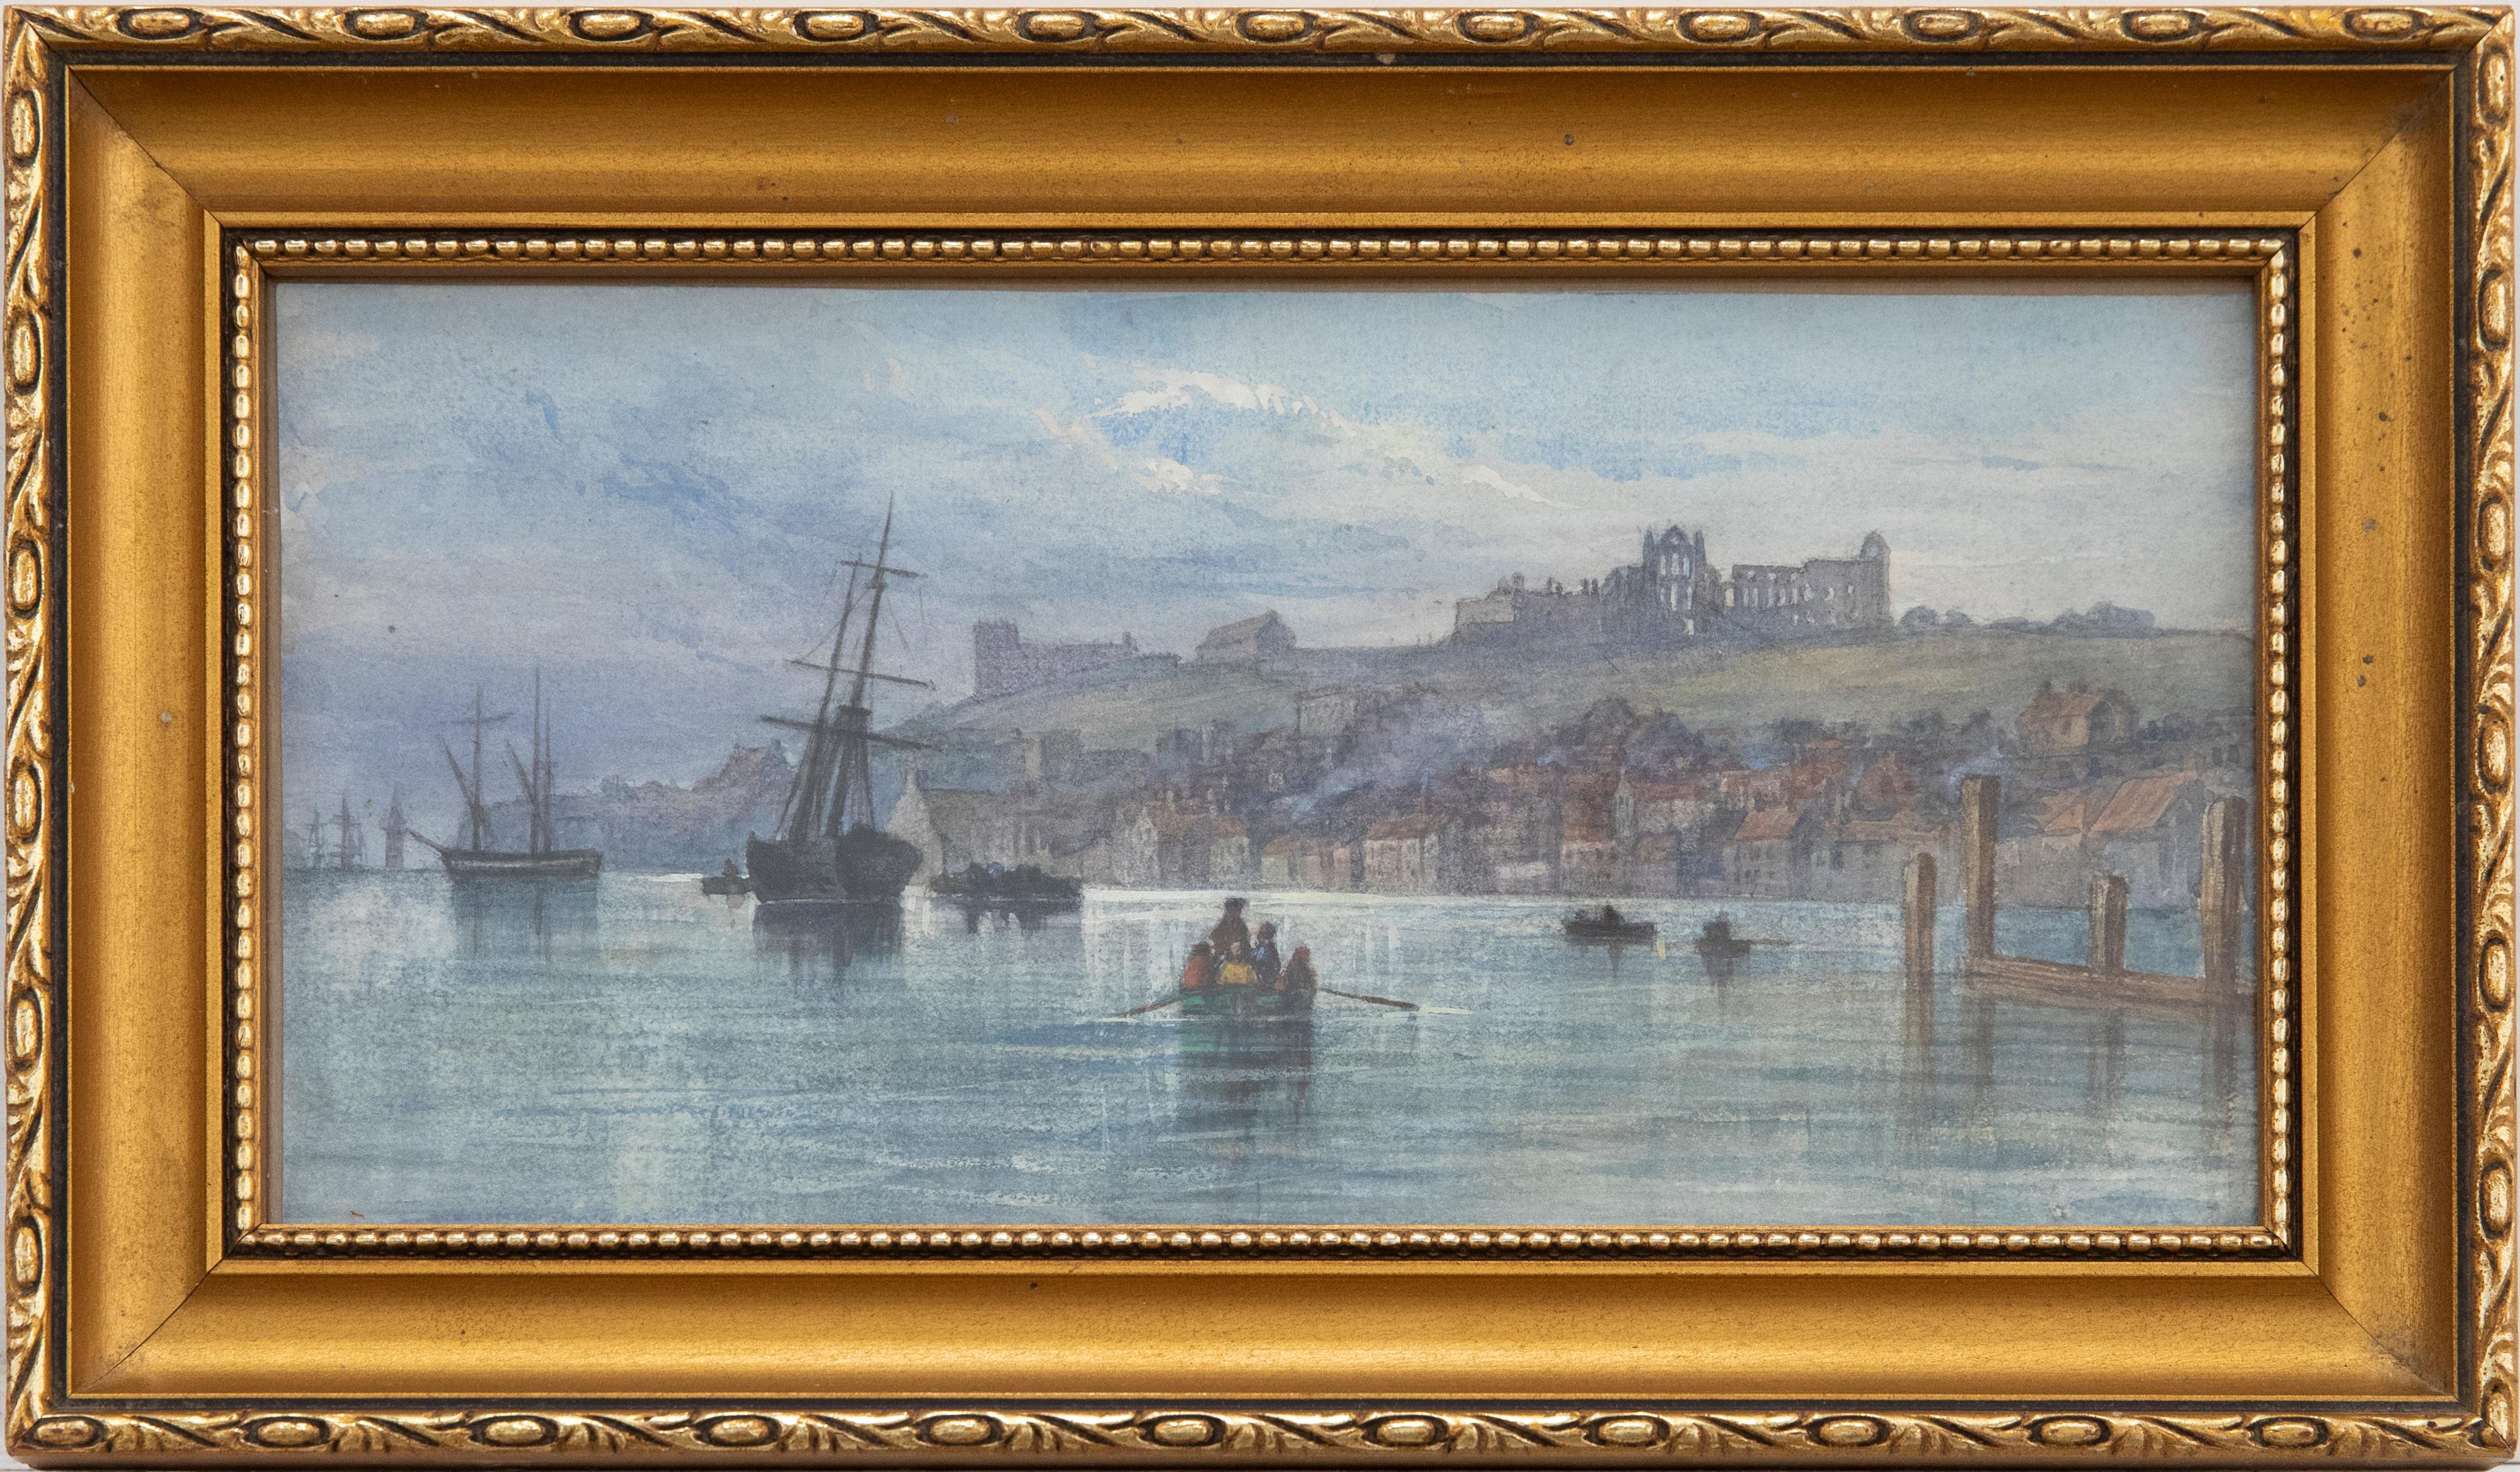 A charming 19th century watercolour of Whitby Abbey captured from the sea. In the foreground a manned rowing boat sets sail for shore, after anchoring in the bay. Smoke from chimneys drifts across the town, with Whitby Abbey standing watch on the